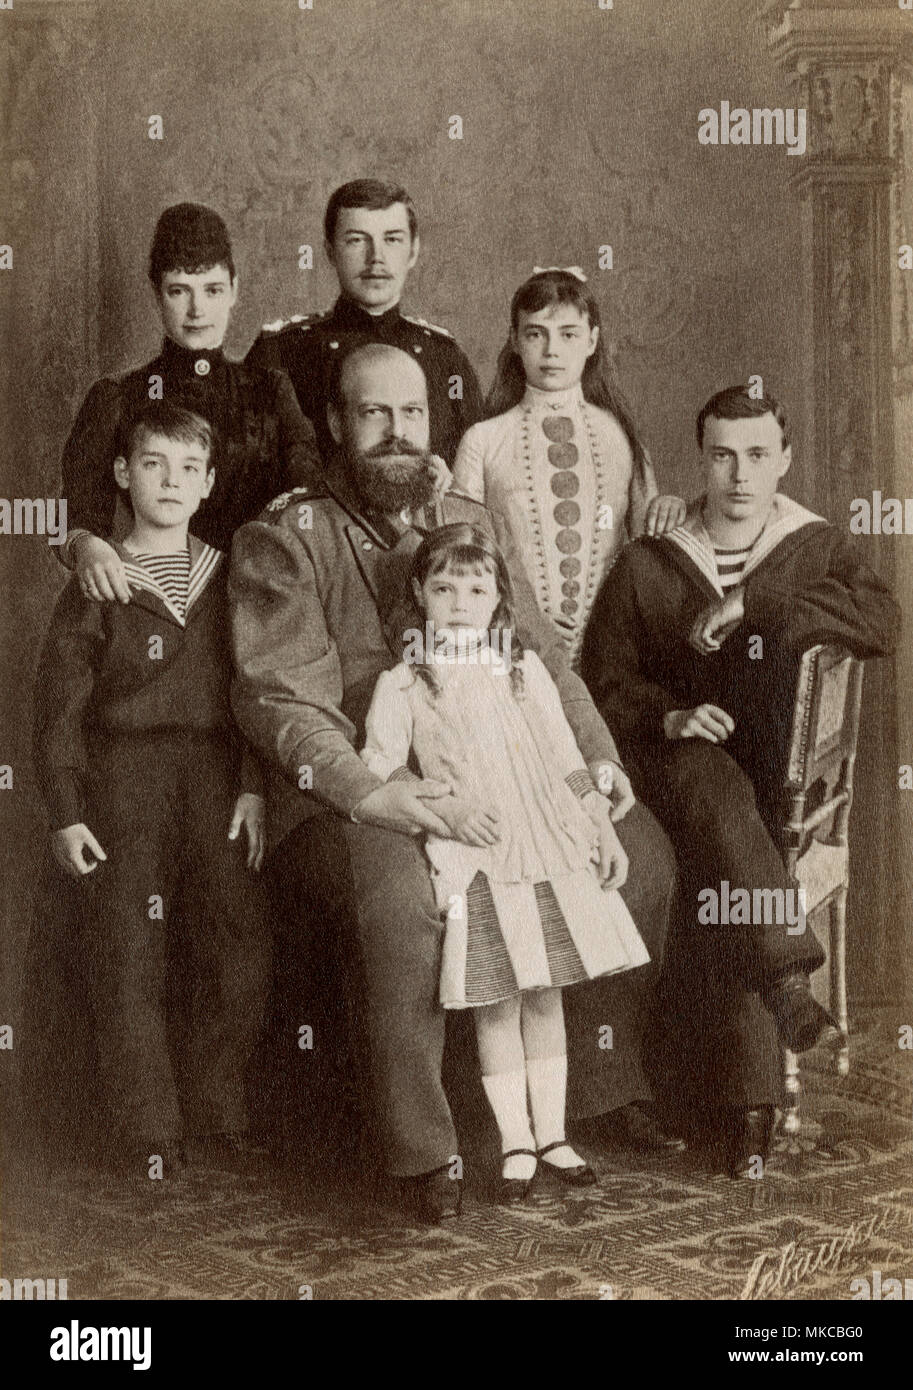 Russian Czar Alexander III and his family, including future czar Nicholas II in the rear,1890s. Photograph Stock Photo